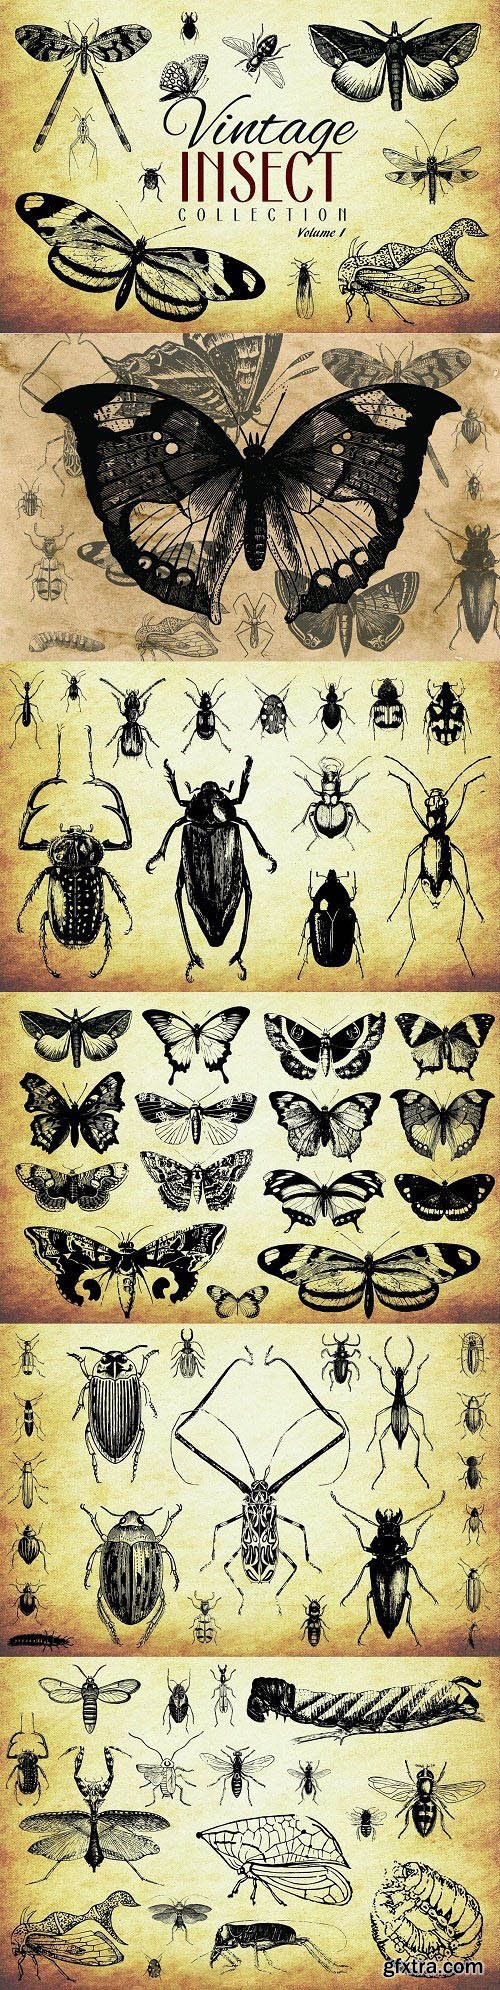 CM - 200 Vintage Insect Vector Collection - Vol.1